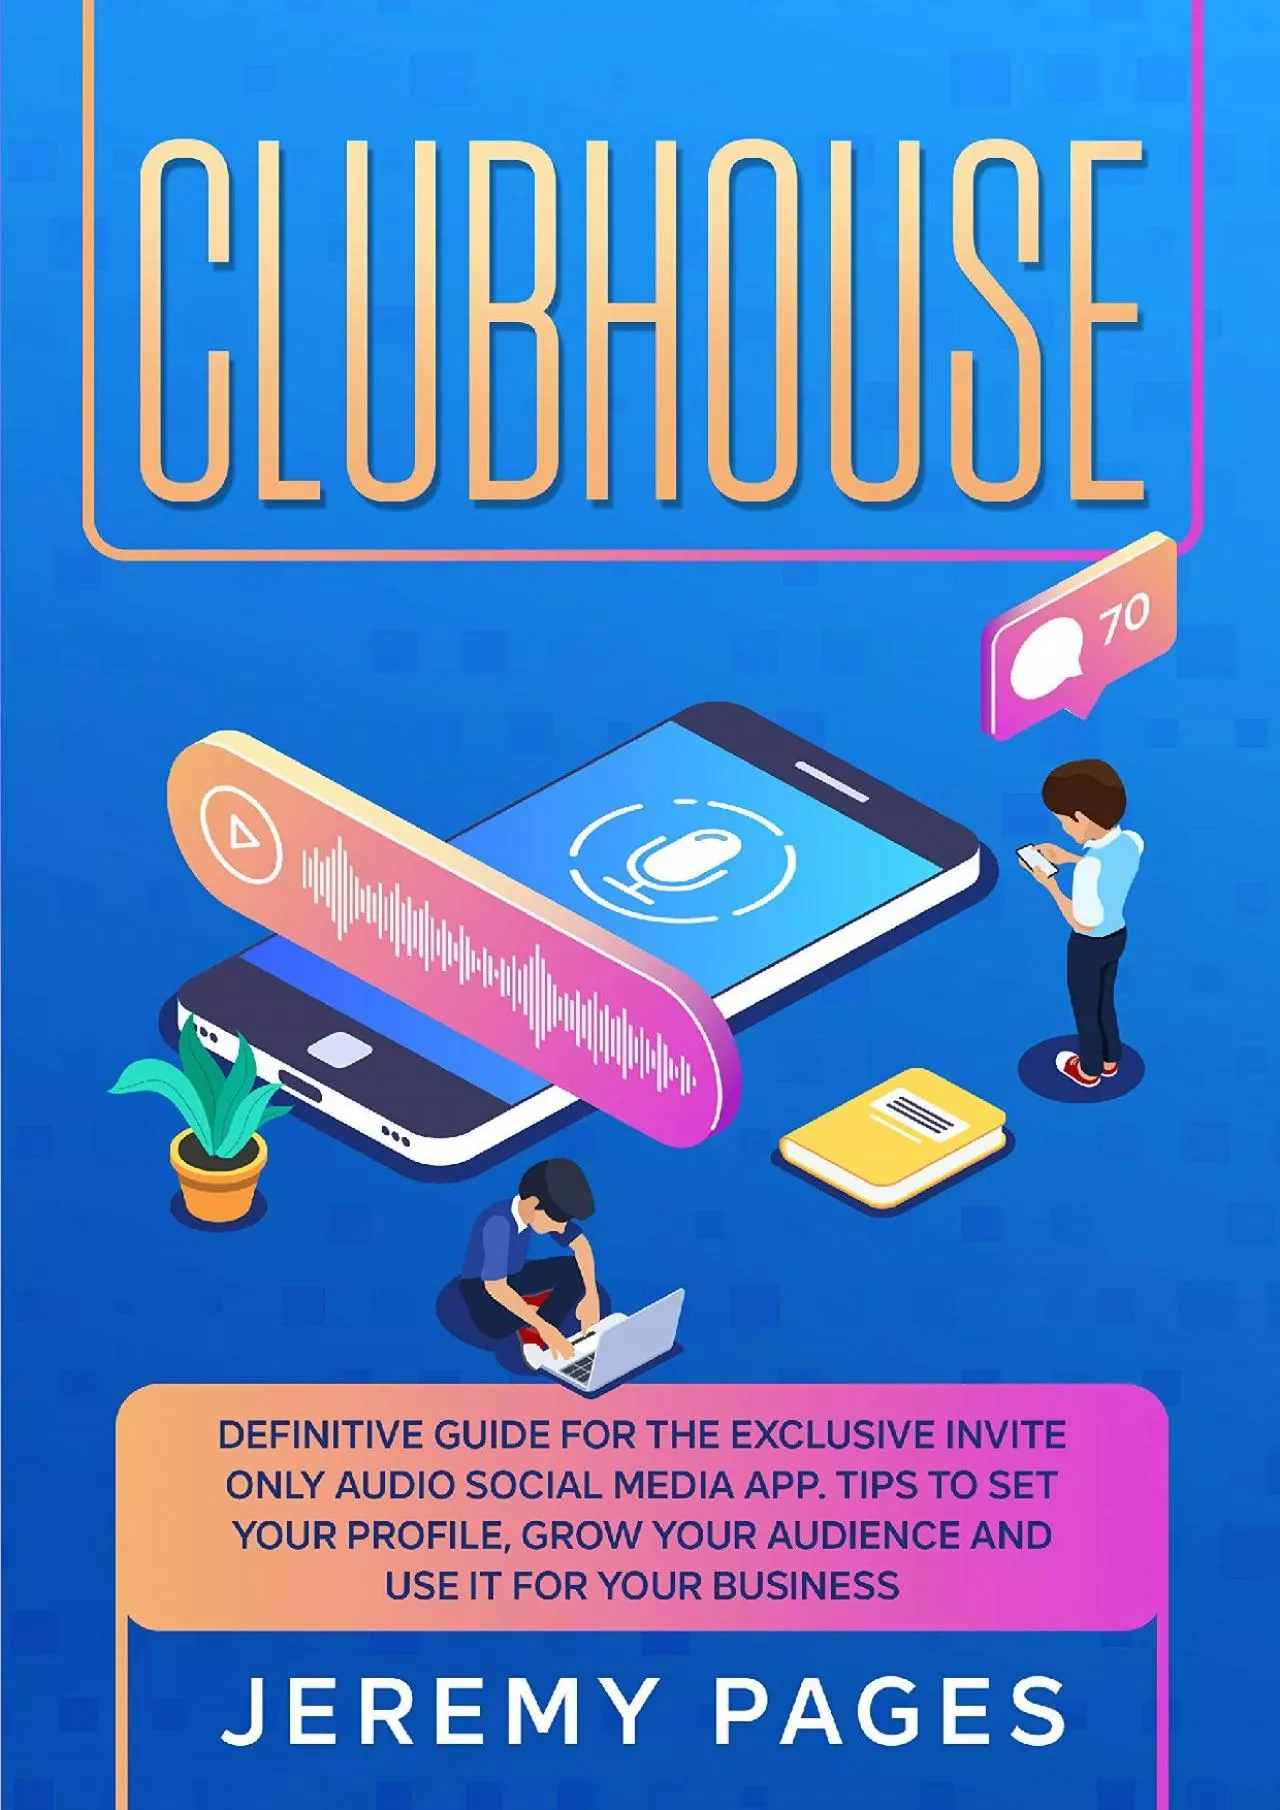 Clubhouse: Definitive Guide for the Exclusive Invite Only Audio Social Media App. Tips